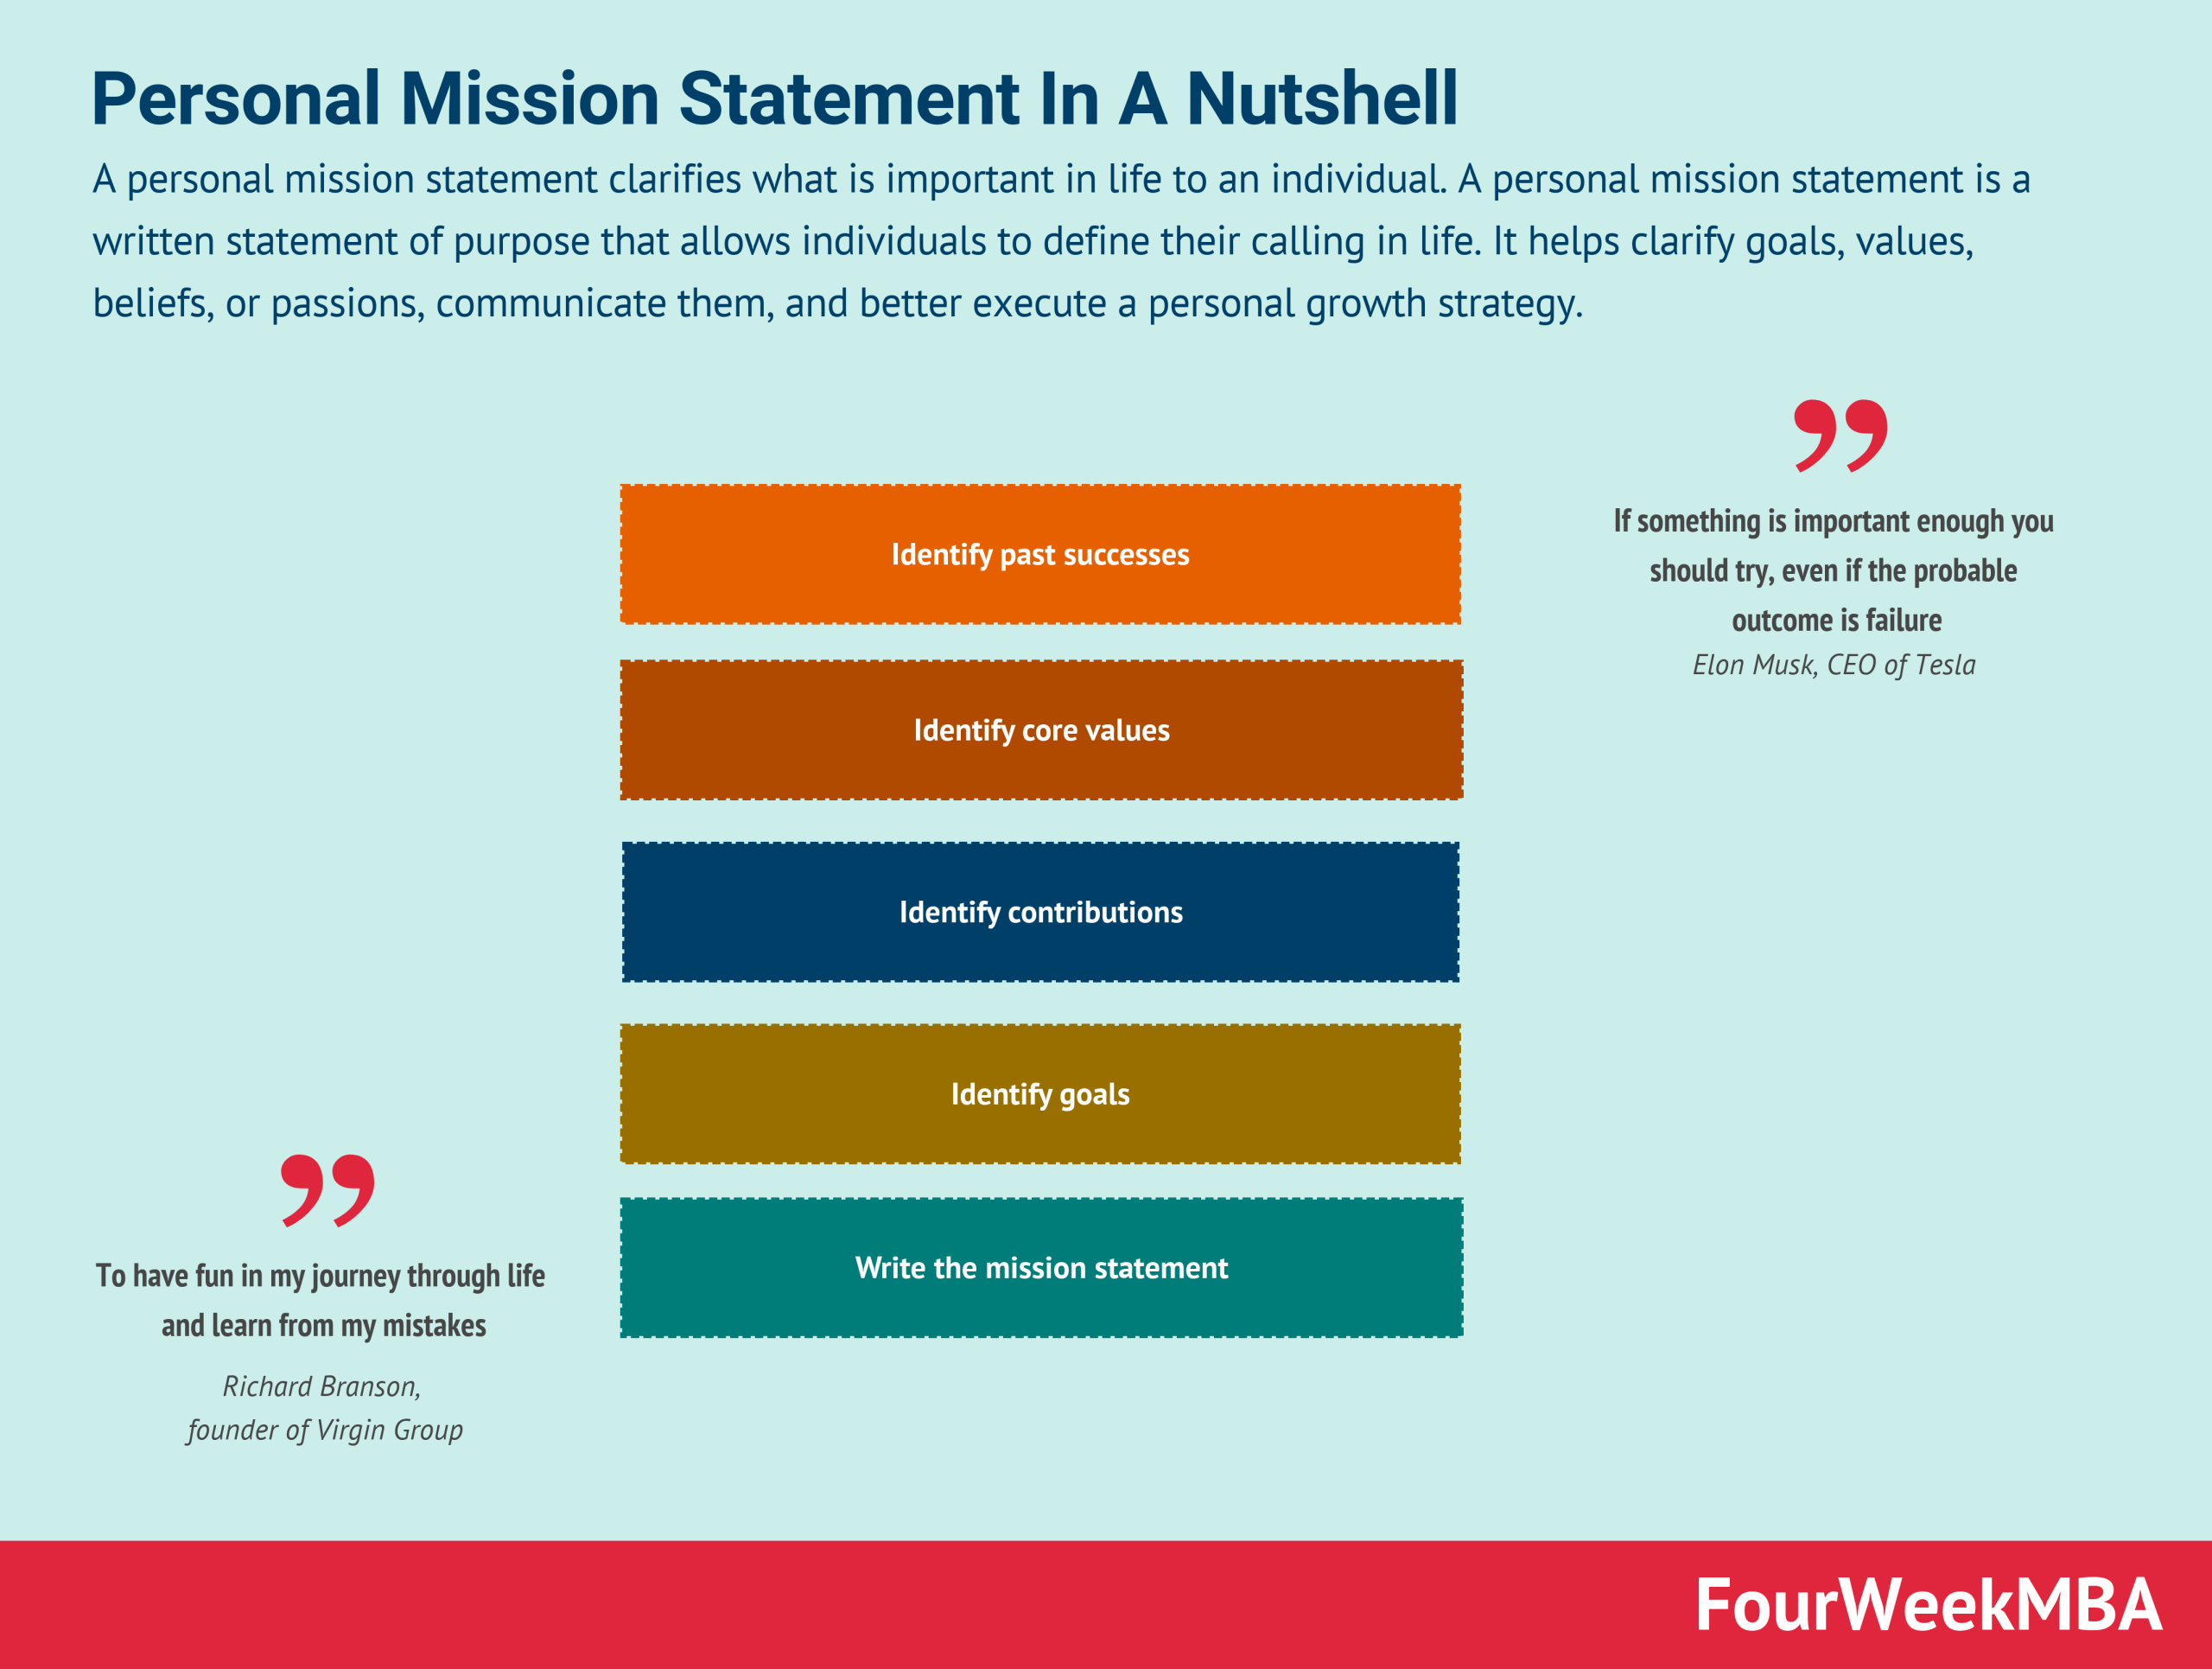 Personal Mission Statement In A Nutshell - FourWeekMBA